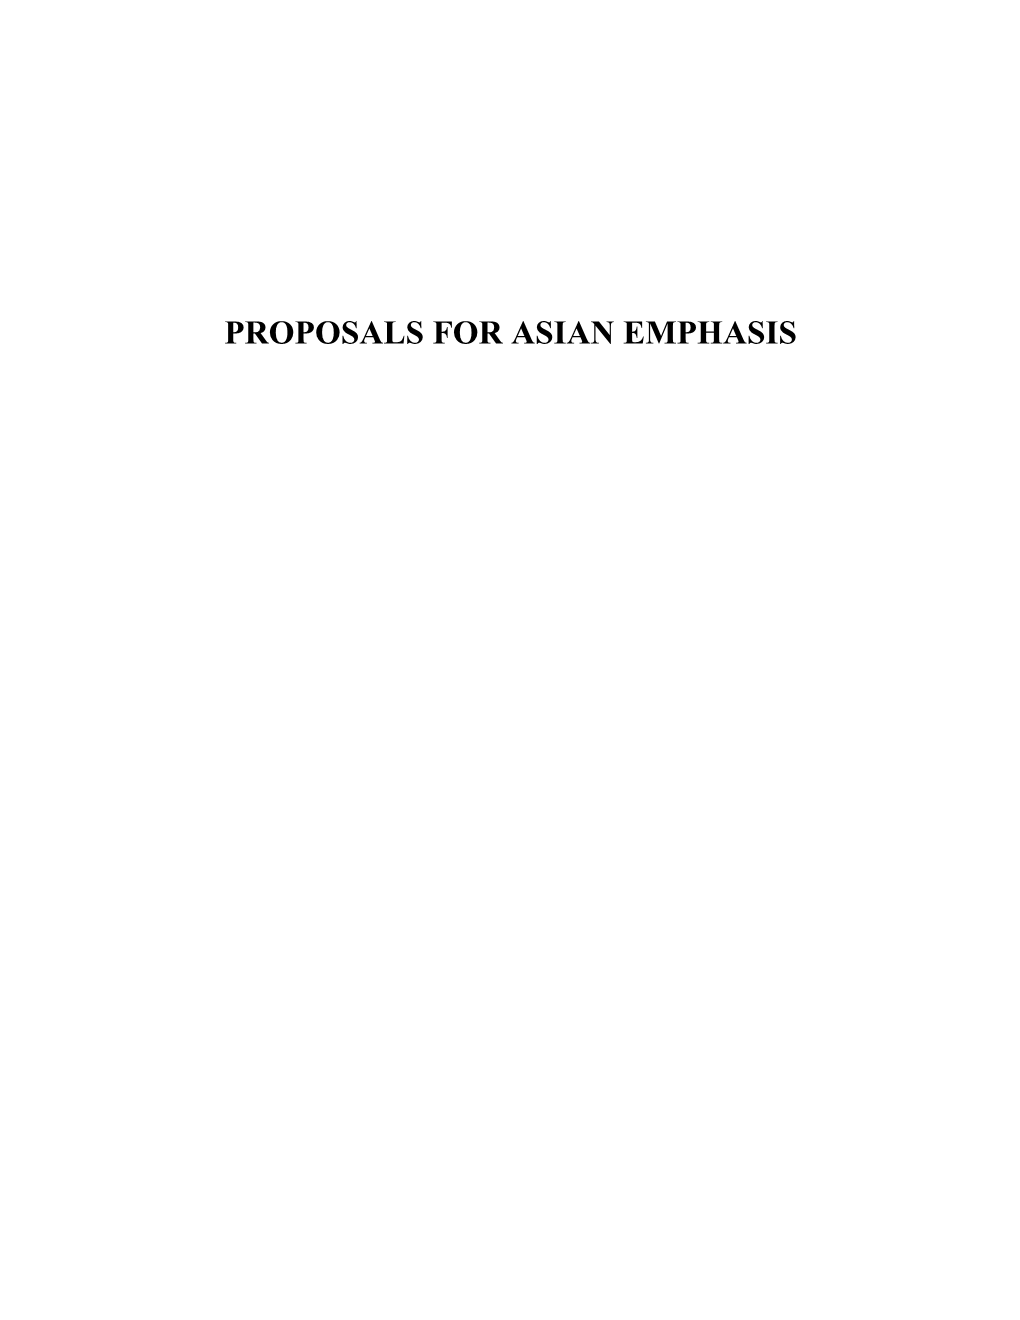 Proposals for Asian Emphasis